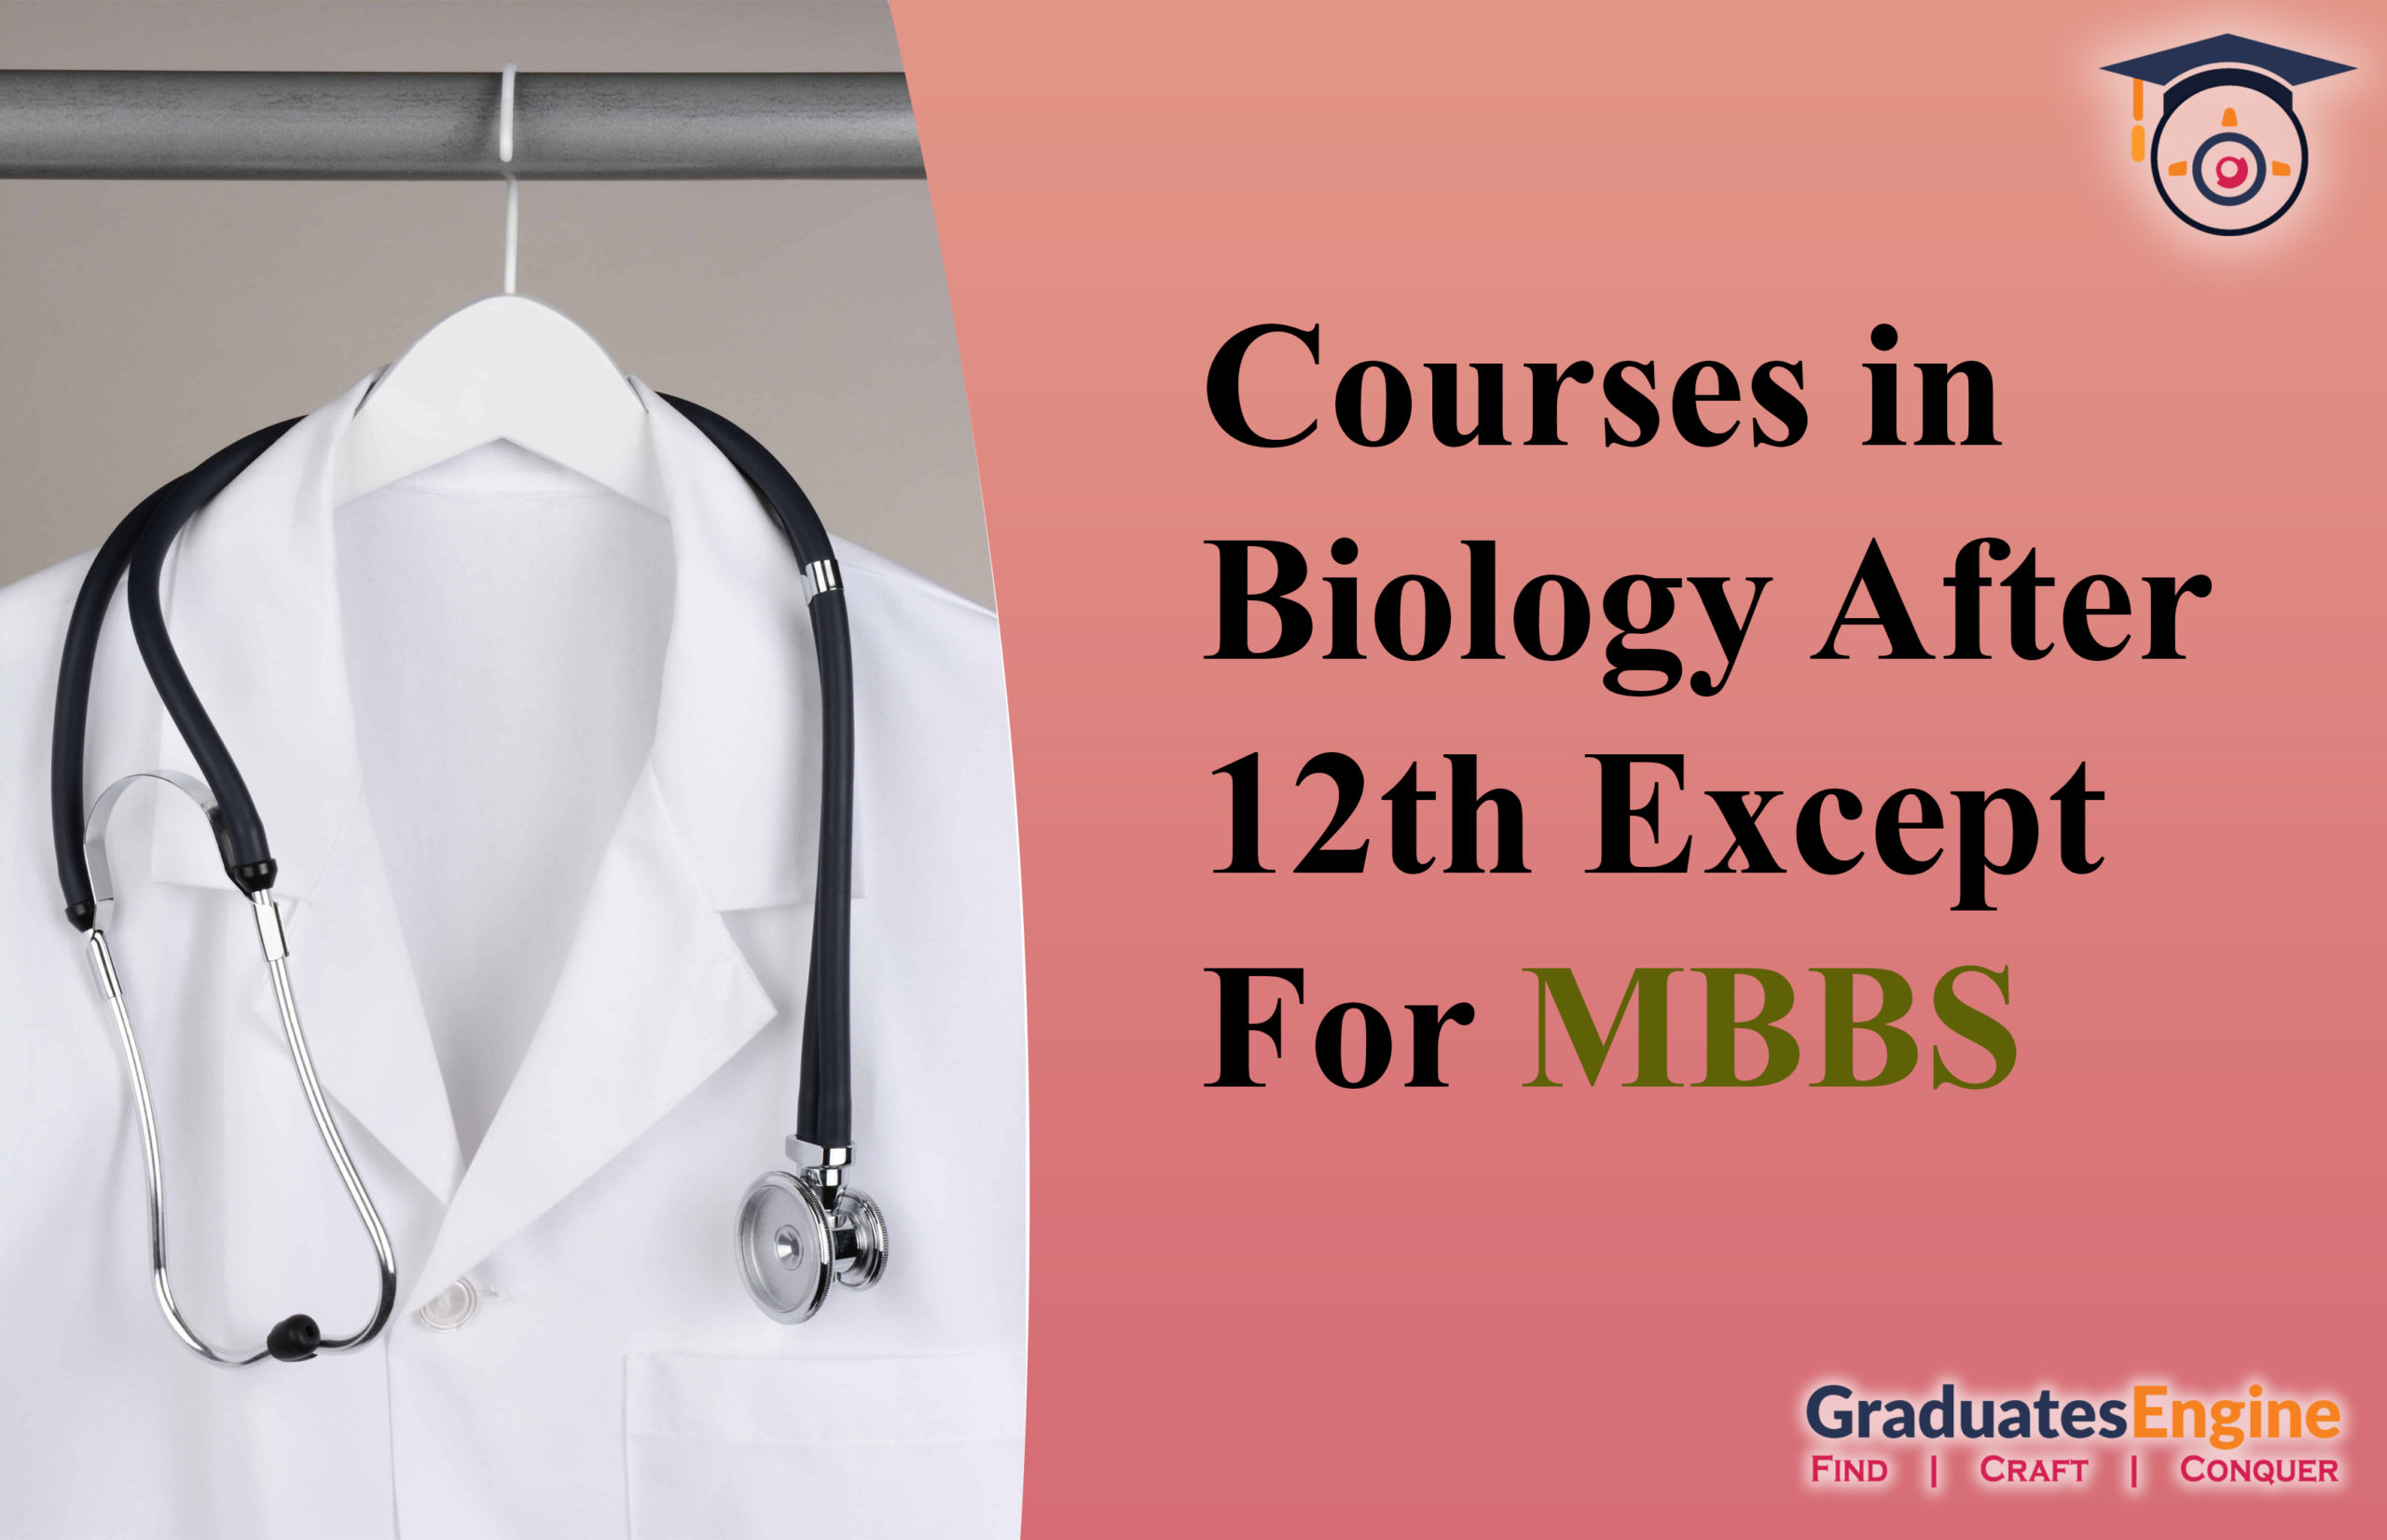 Courses In Biology After 12th Except For MBBS